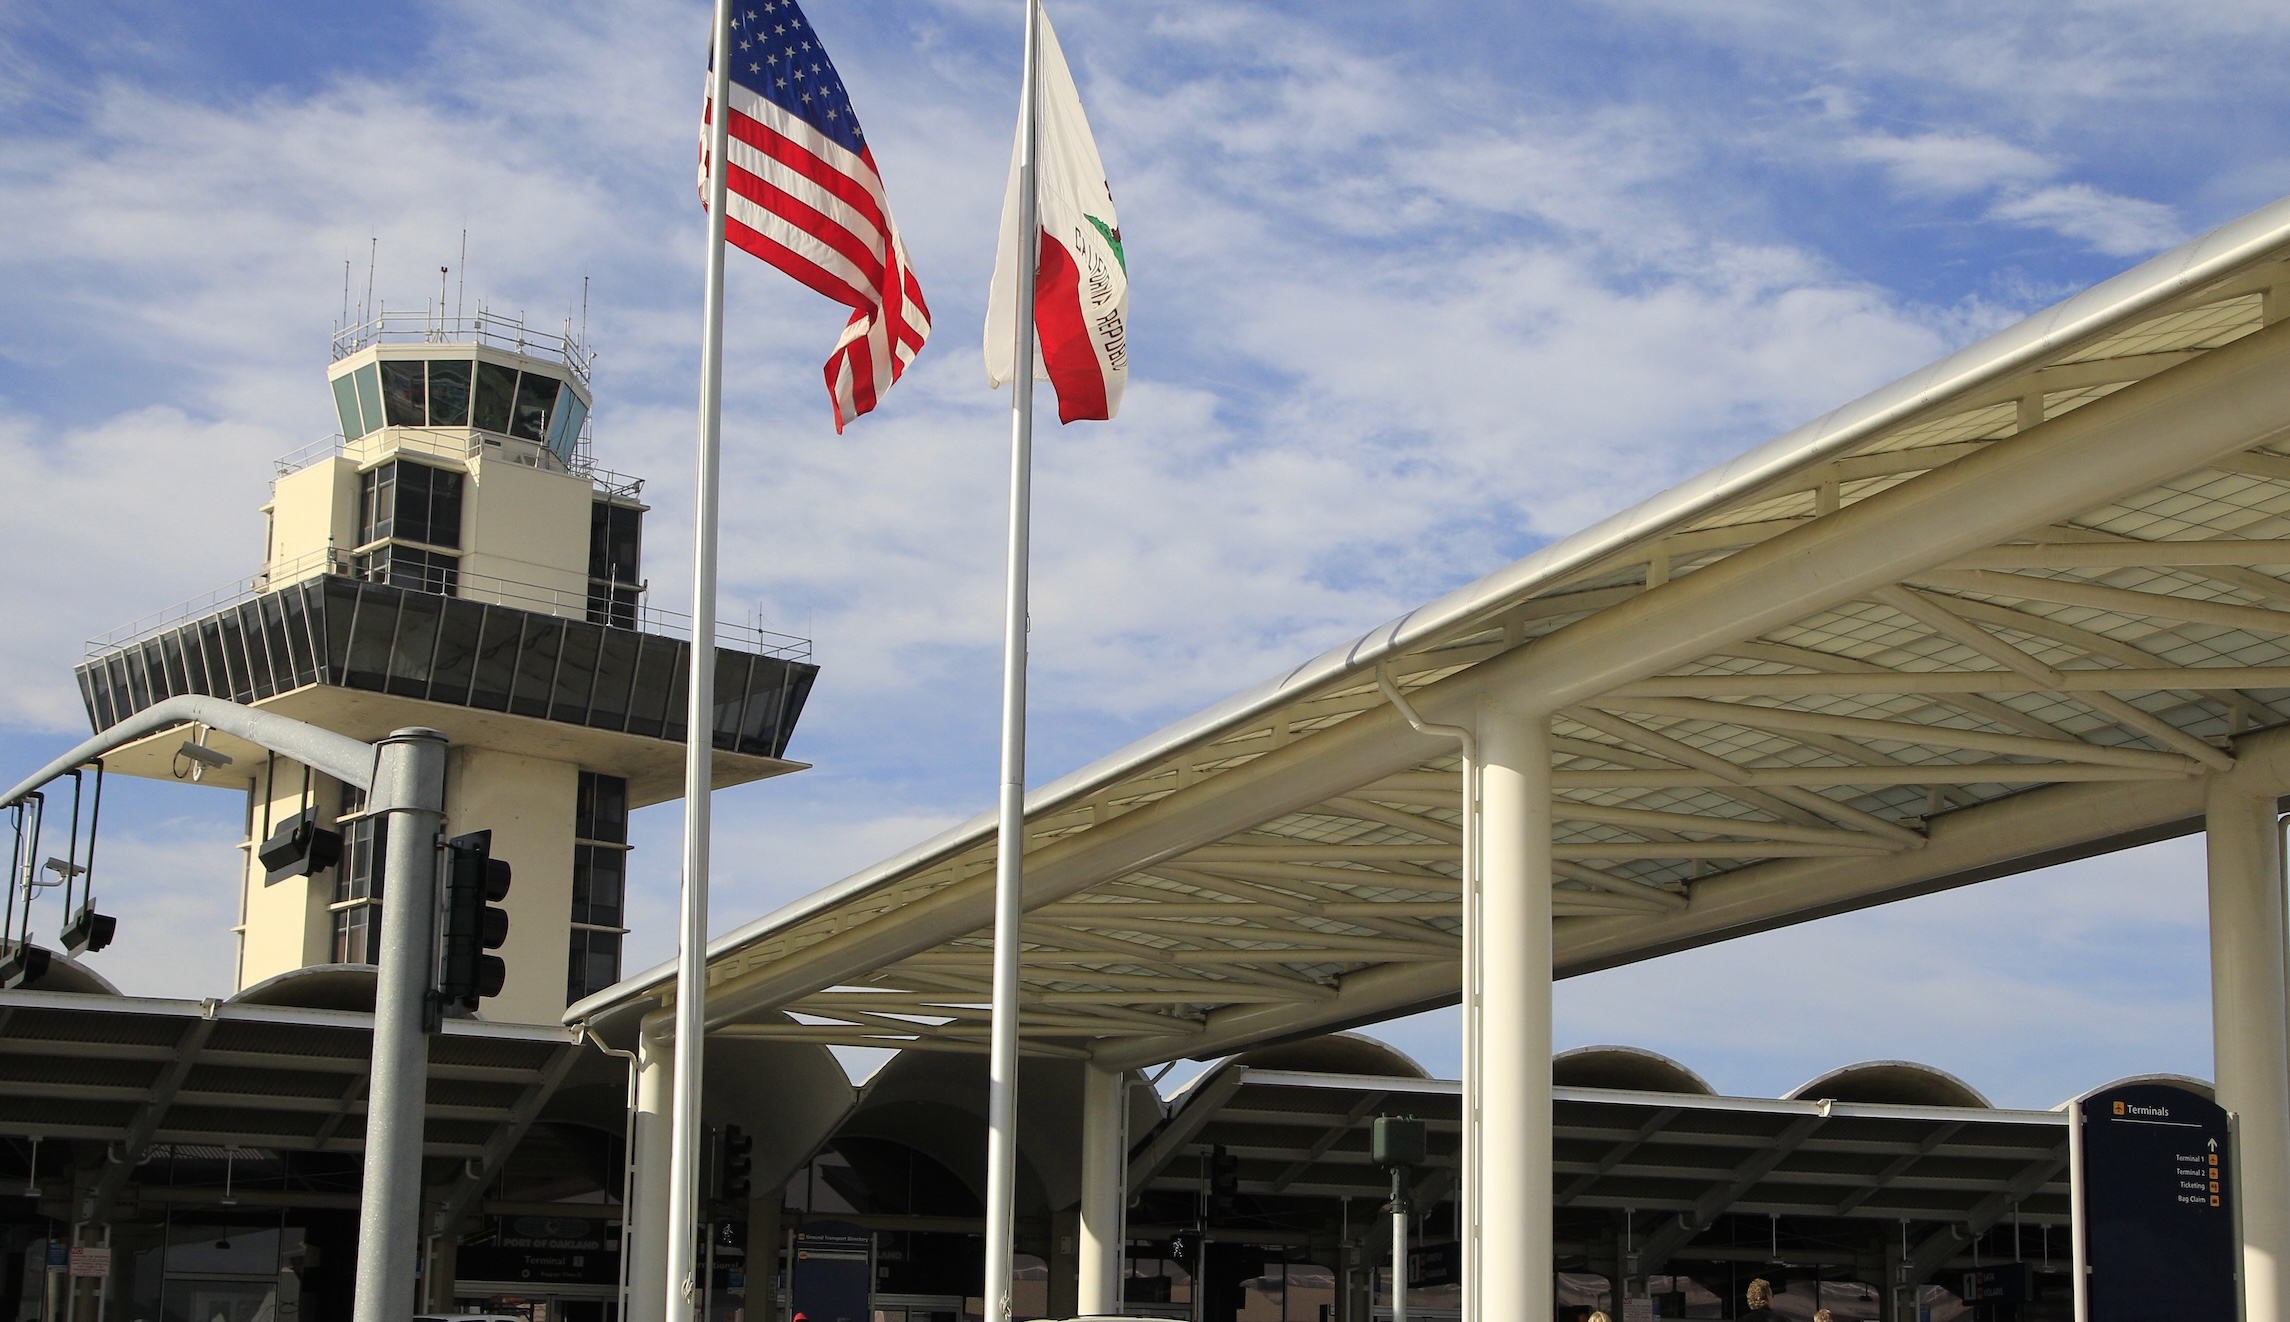 San Francisco sues Oakland over airport name change for ‘causing confusion’